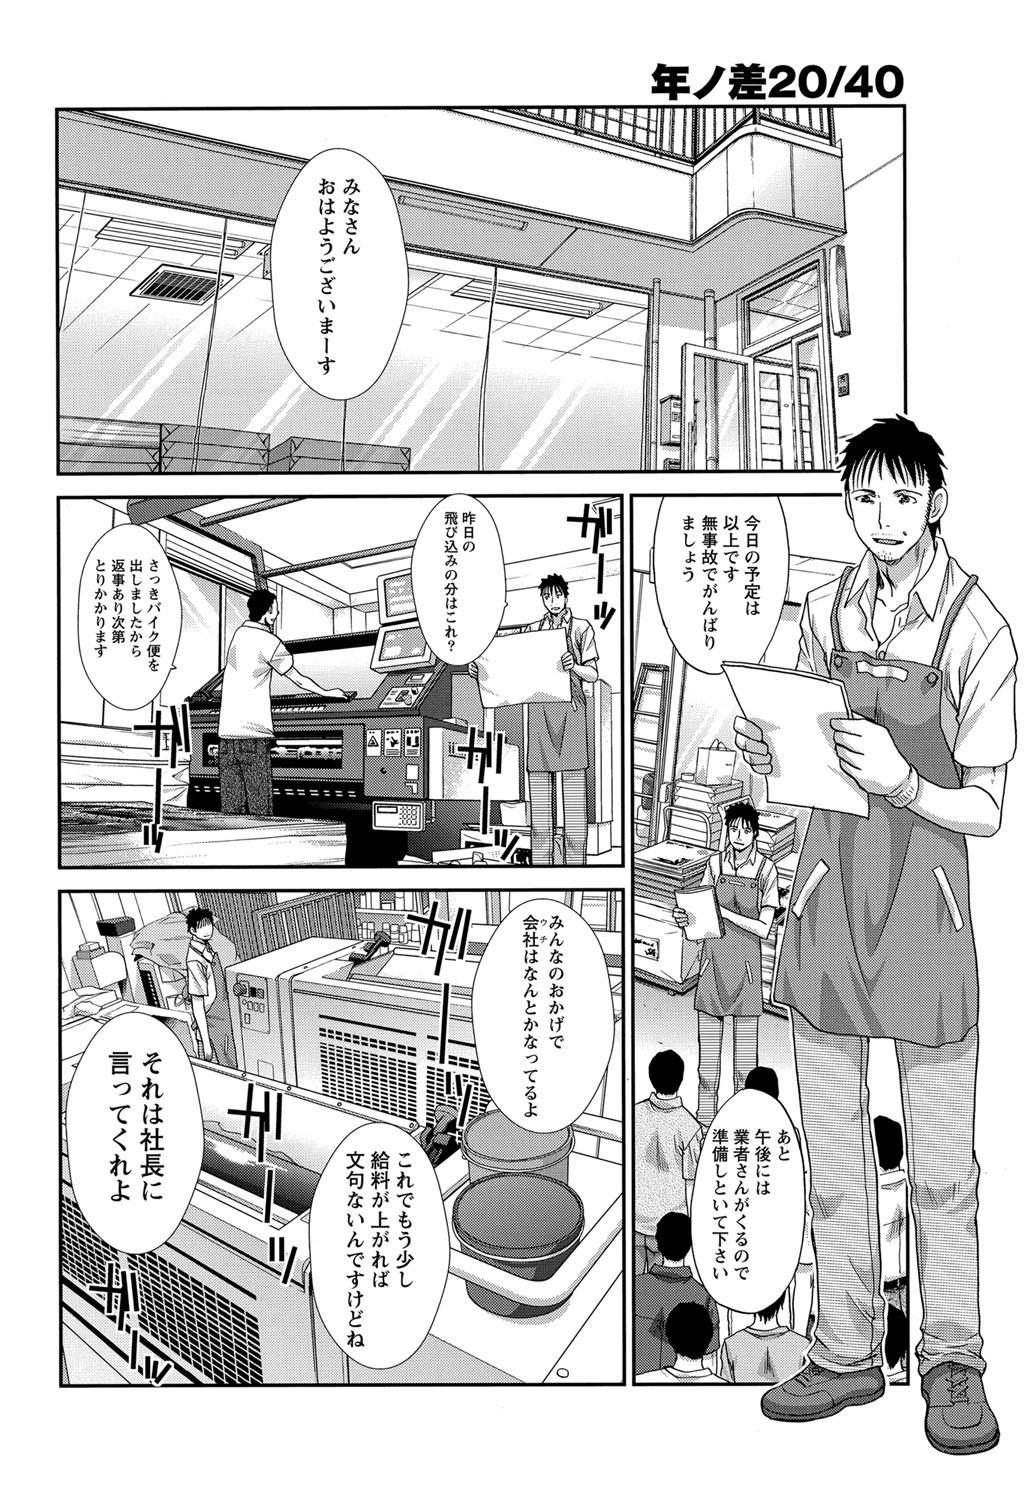 Xxx 20/40 Toshi no Sa  Ch.1-9 Aunt - Page 4